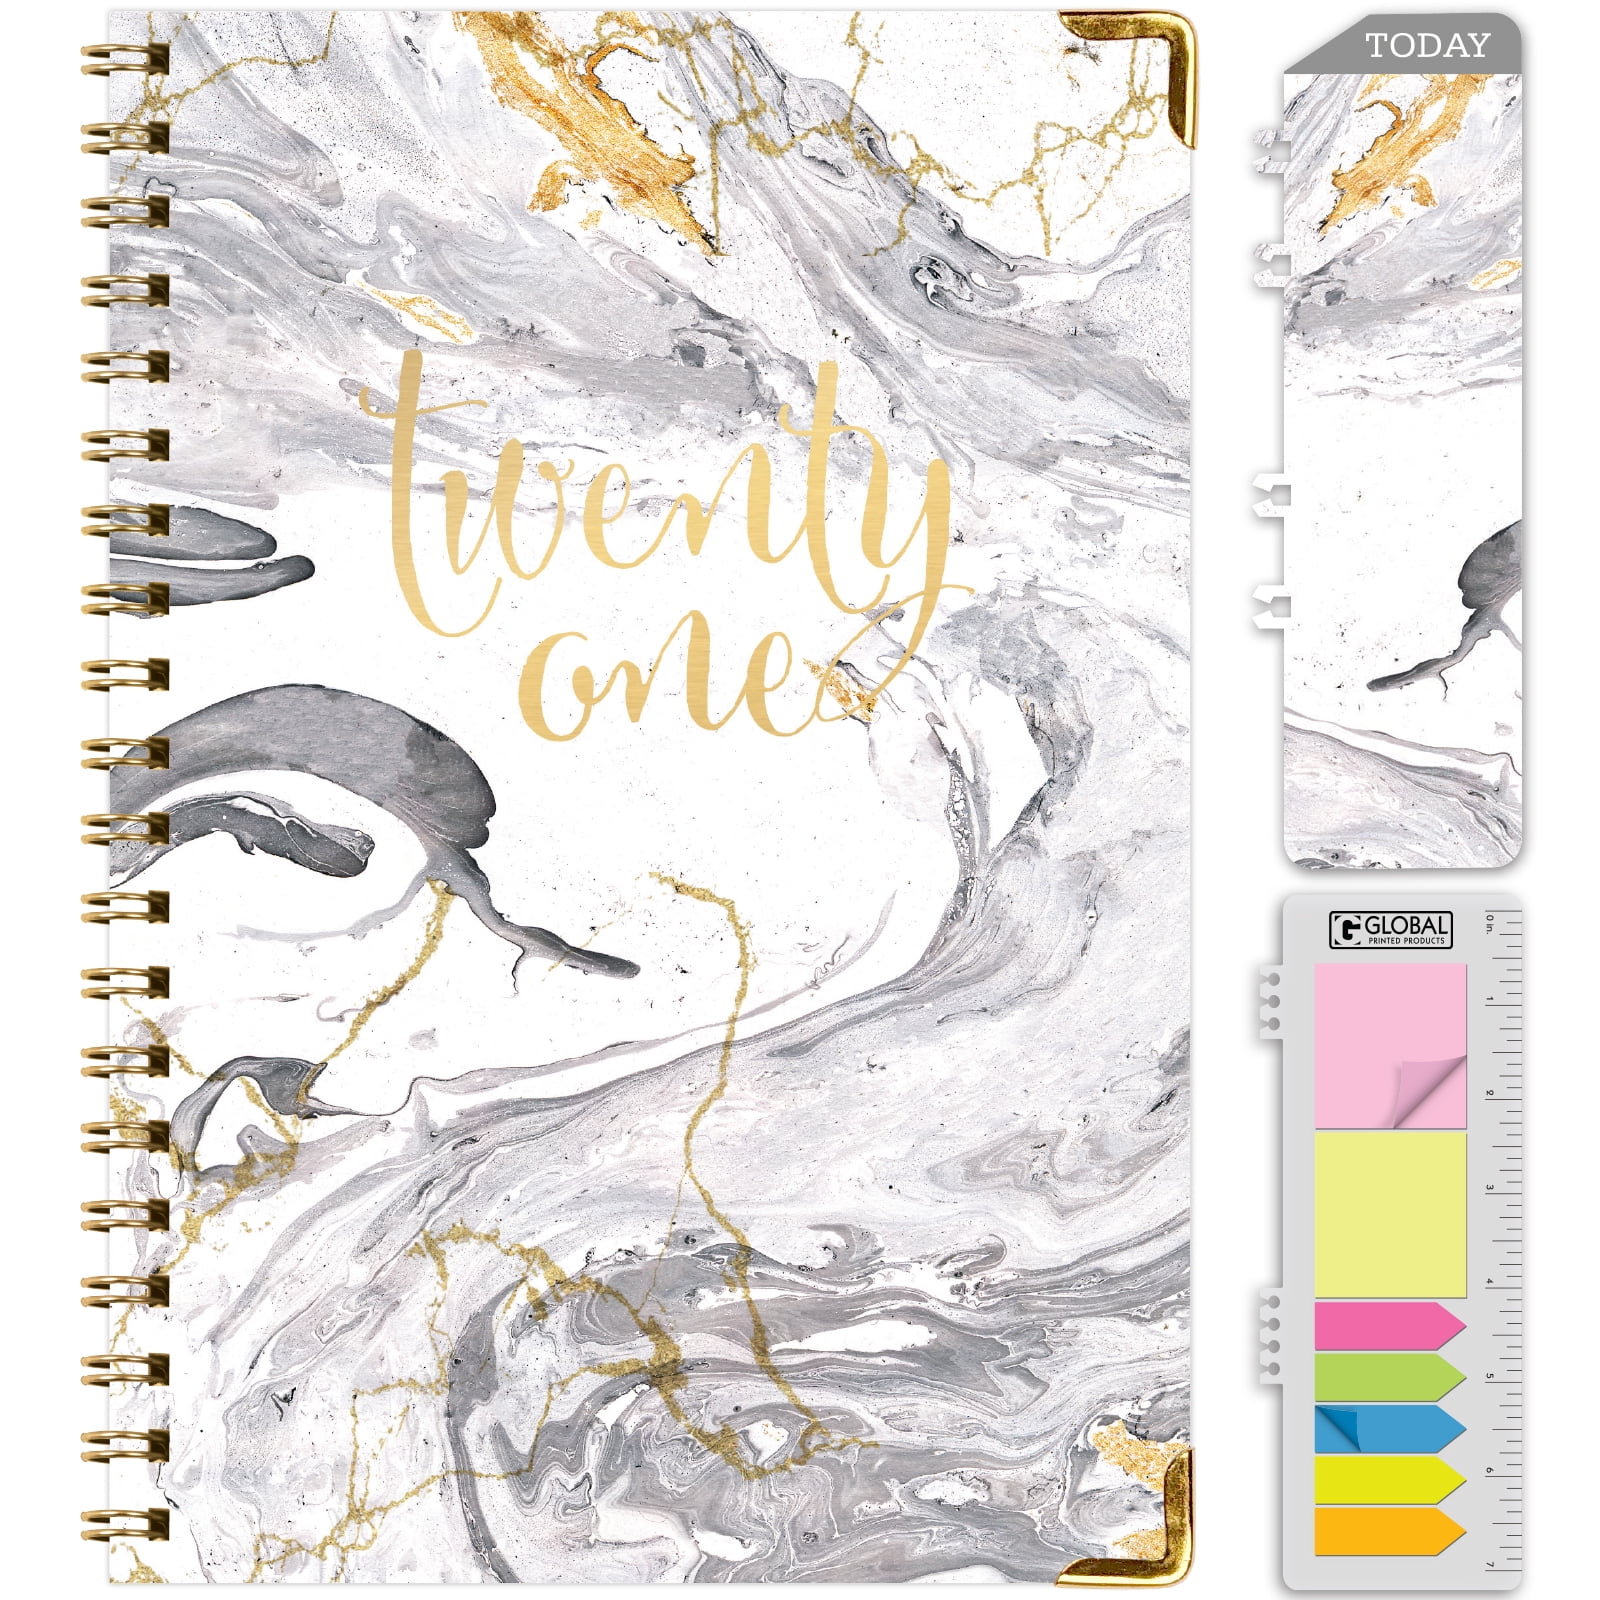 Bookmark 5.5x8 Daily Weekly Monthly Planner Yearly Agenda HARDCOVER 2021 Planner: Pocket Folder and Sticky Note Set Colorful Marble November 2020 Through December 2021 